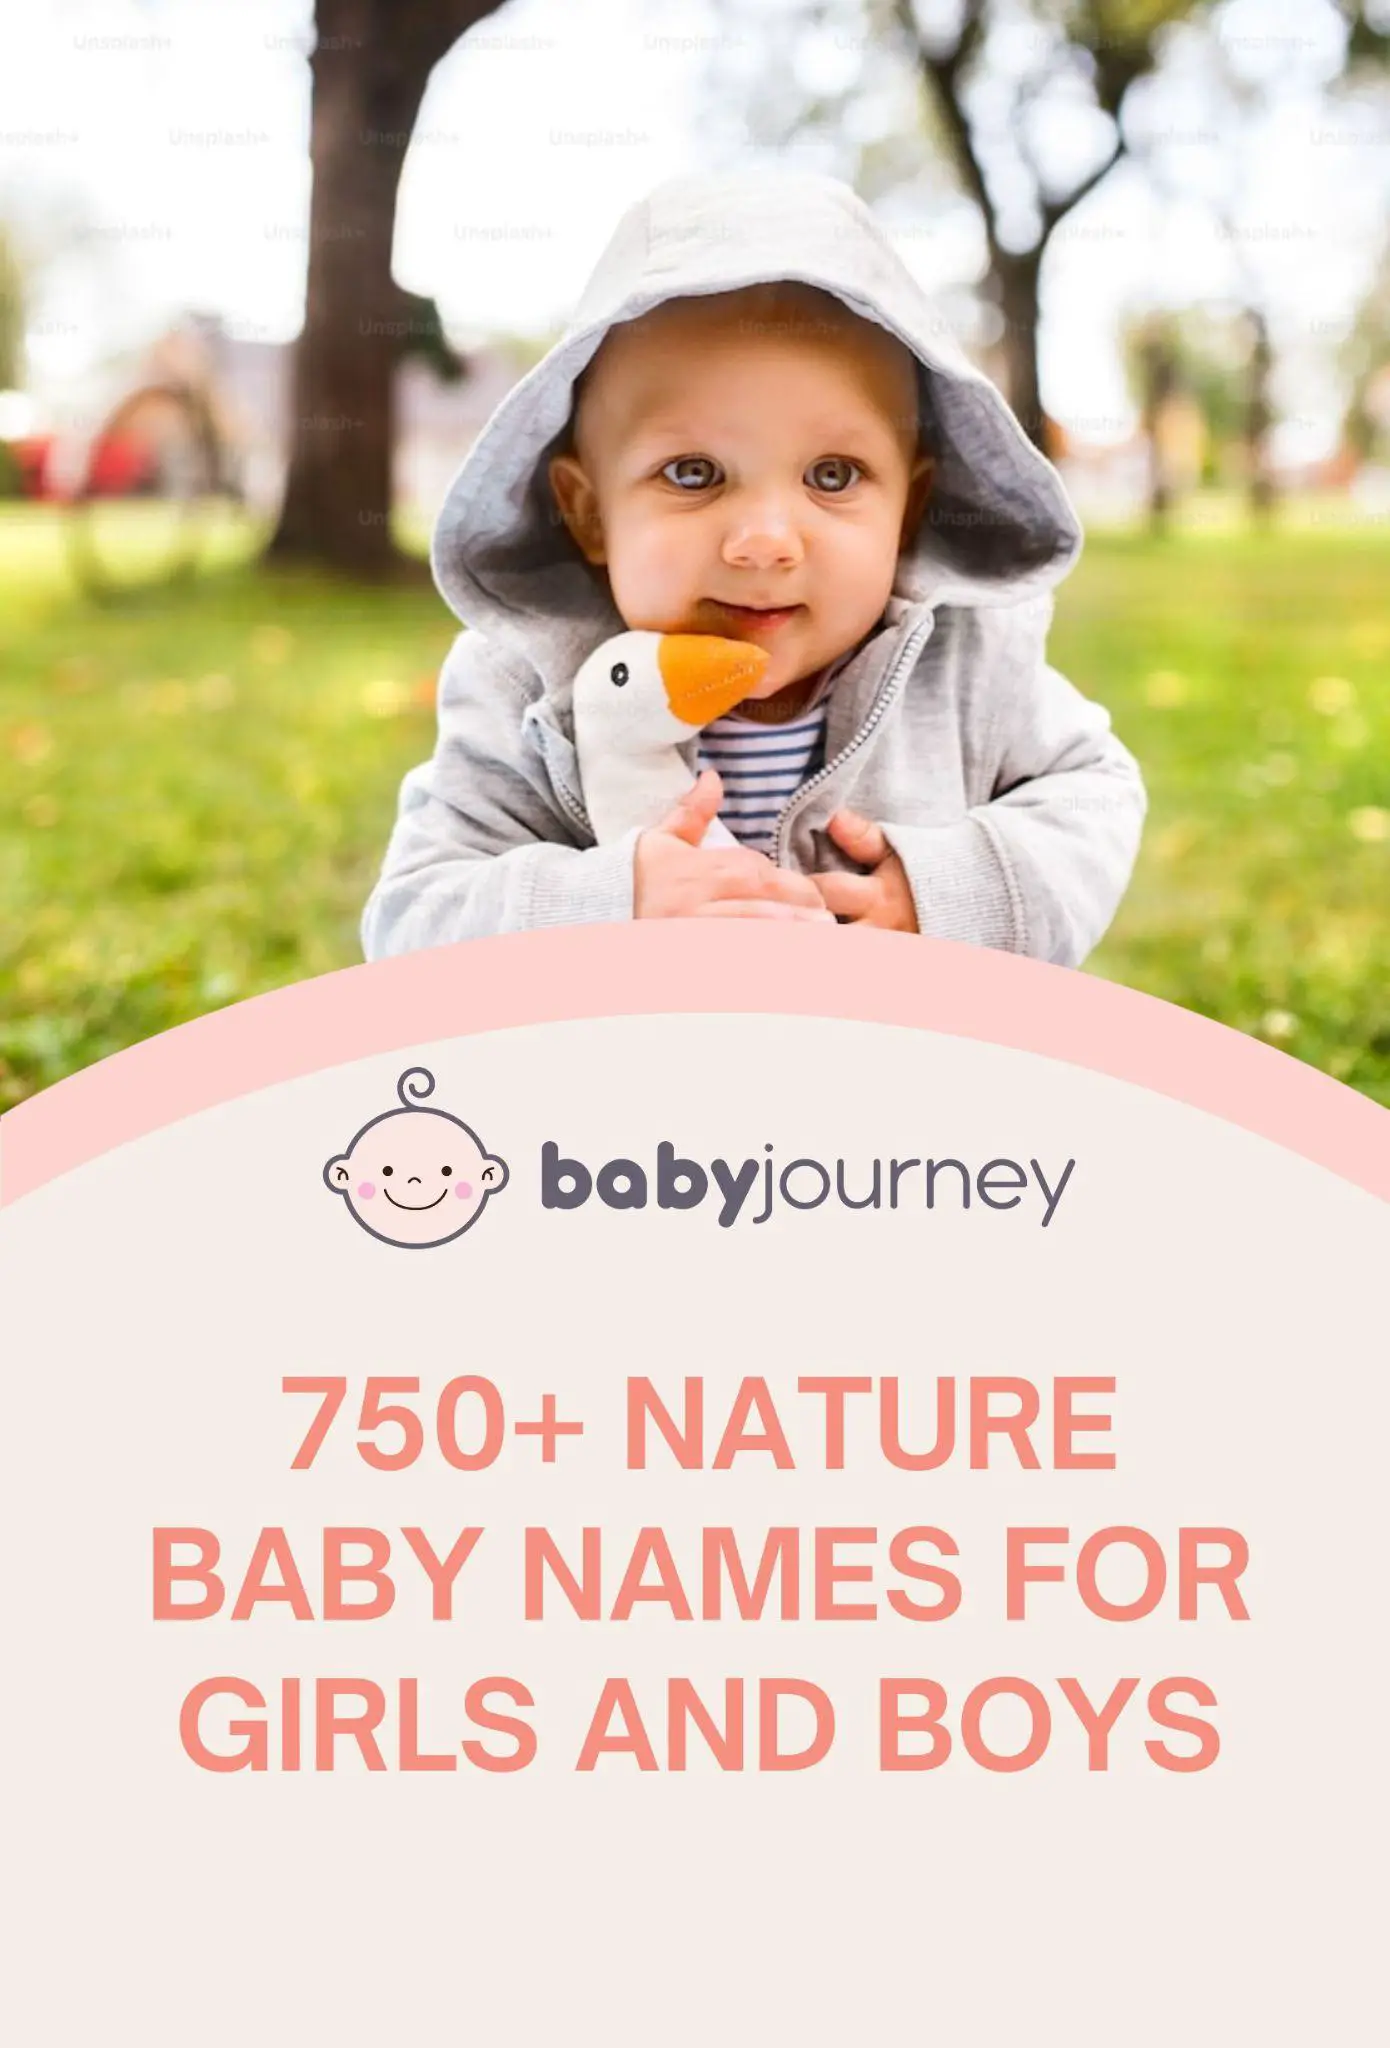 750+ Nature Baby Names for Girls and Boys pinterest - Baby Journey